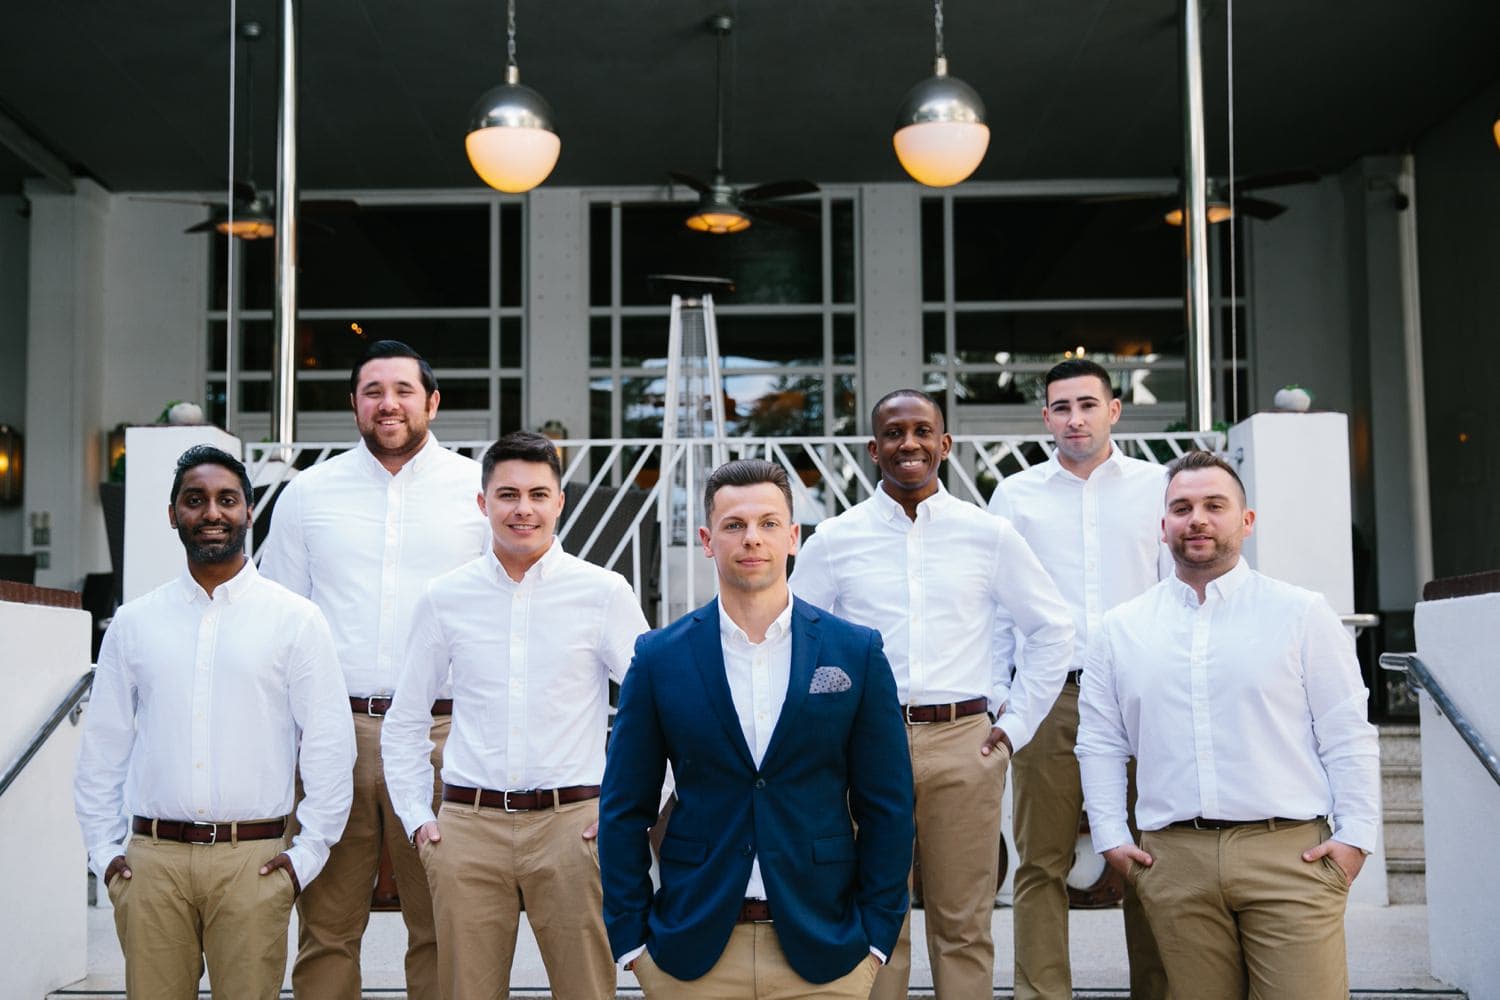 Groom and Groomsmen portrait. Khaki pants and blue jacket suit. Winter Beach Wedding at the National Hotel in South Beach Fl 